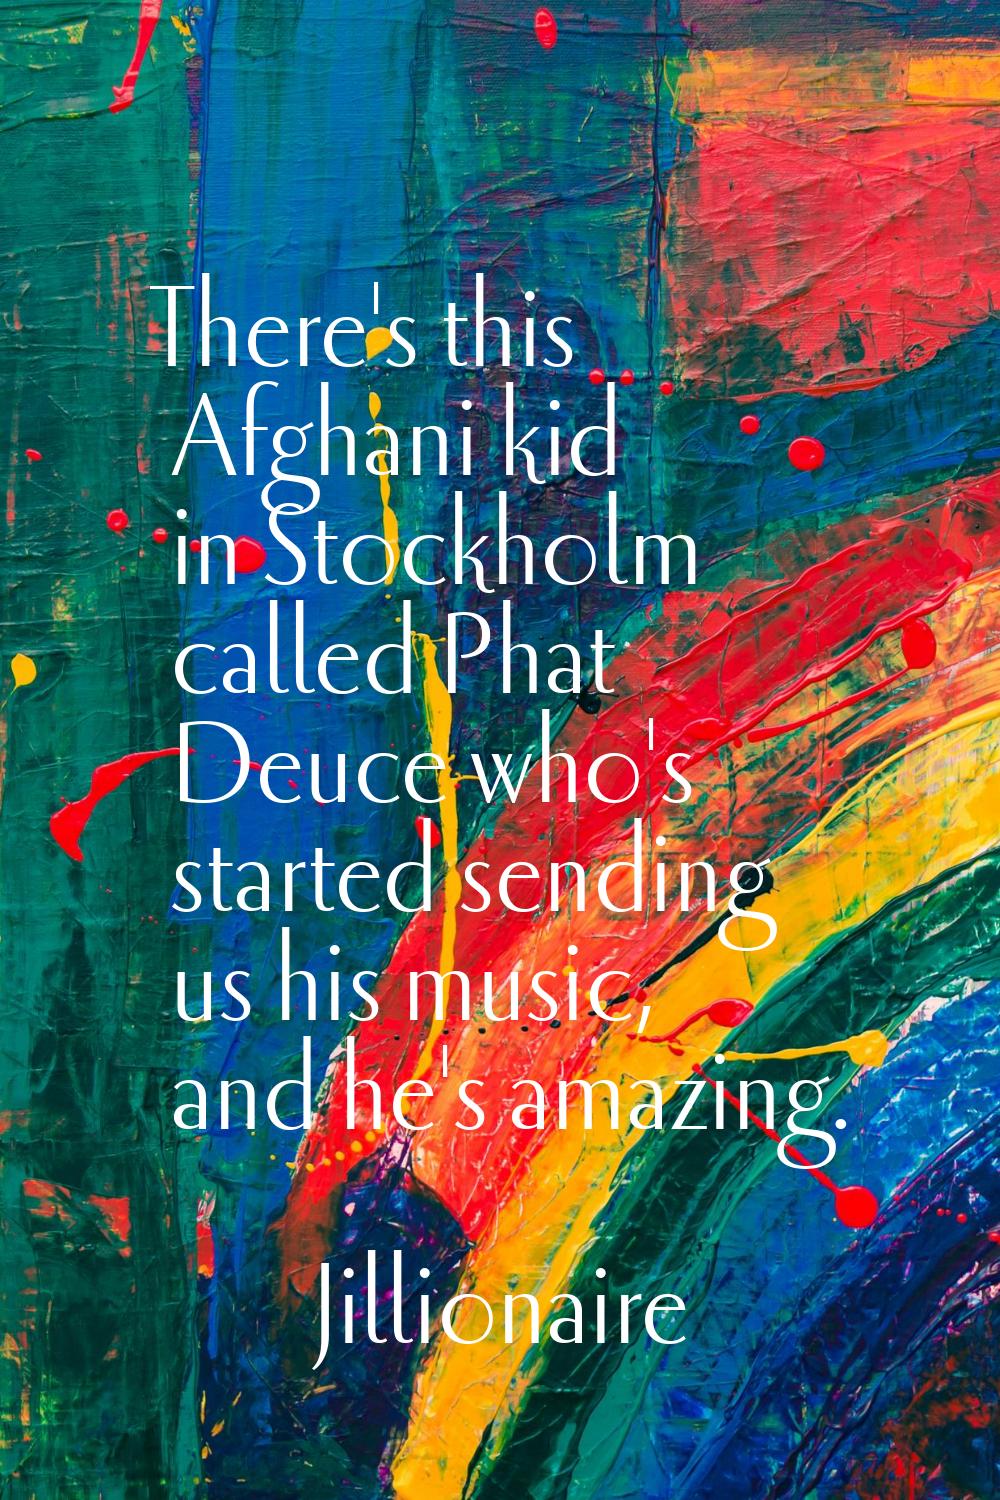 There's this Afghani kid in Stockholm called Phat Deuce who's started sending us his music, and he'